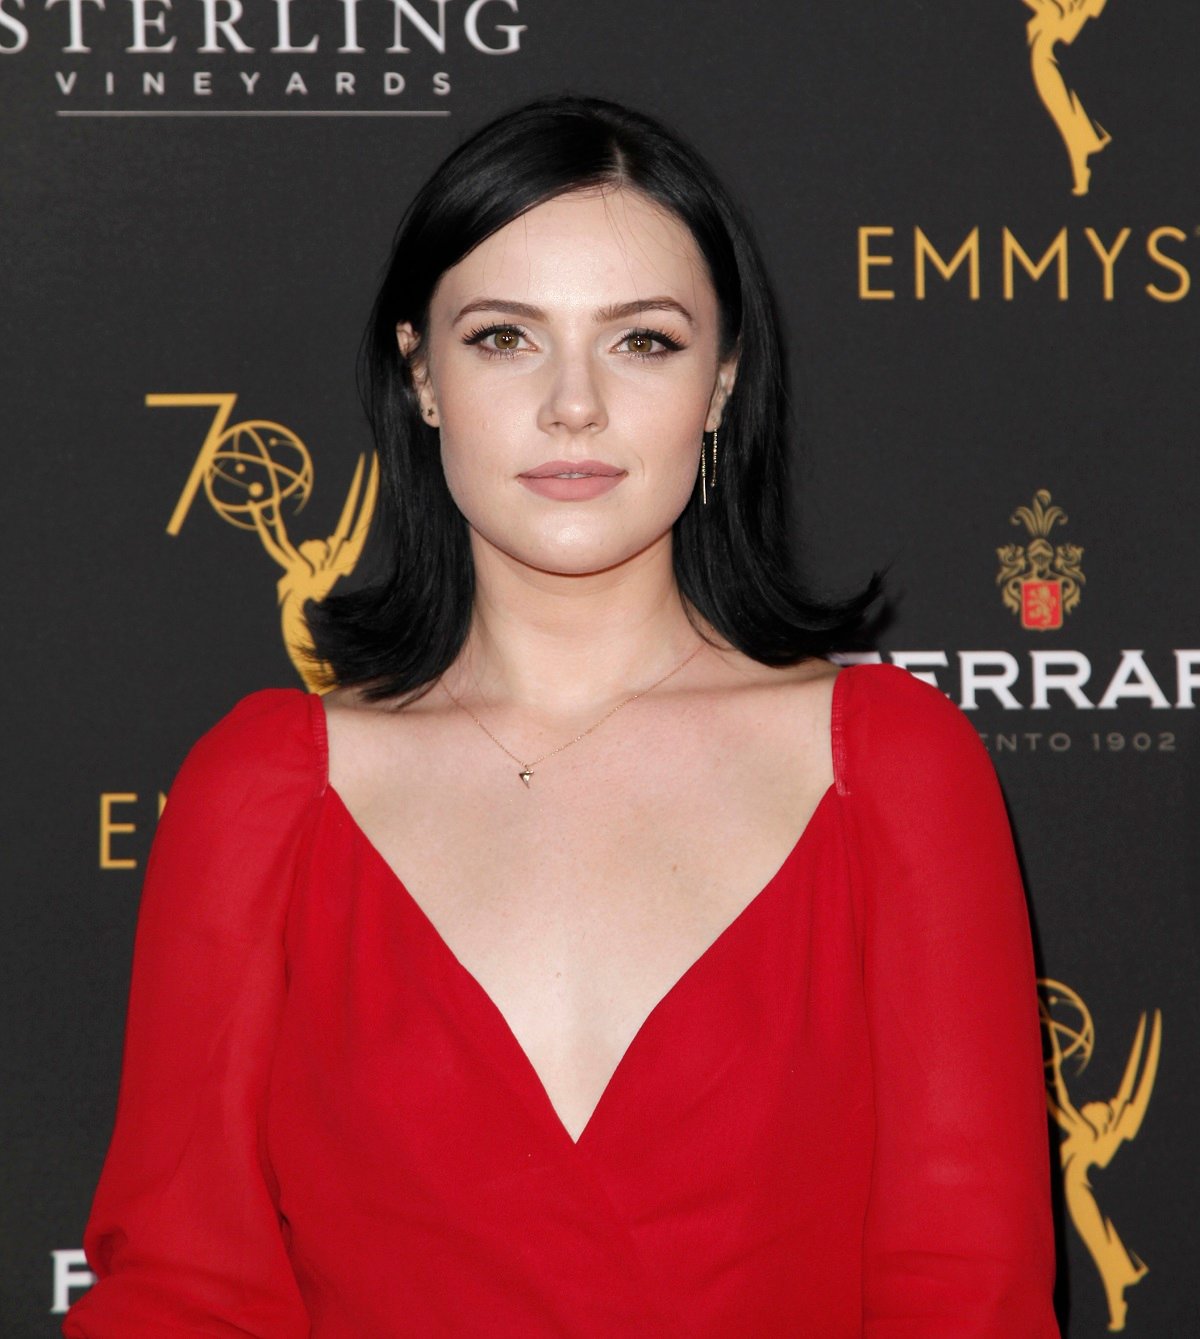 'The Young and the Restless' actor Cait Fairbanks wearing a red dress during the Daytime Emmys.